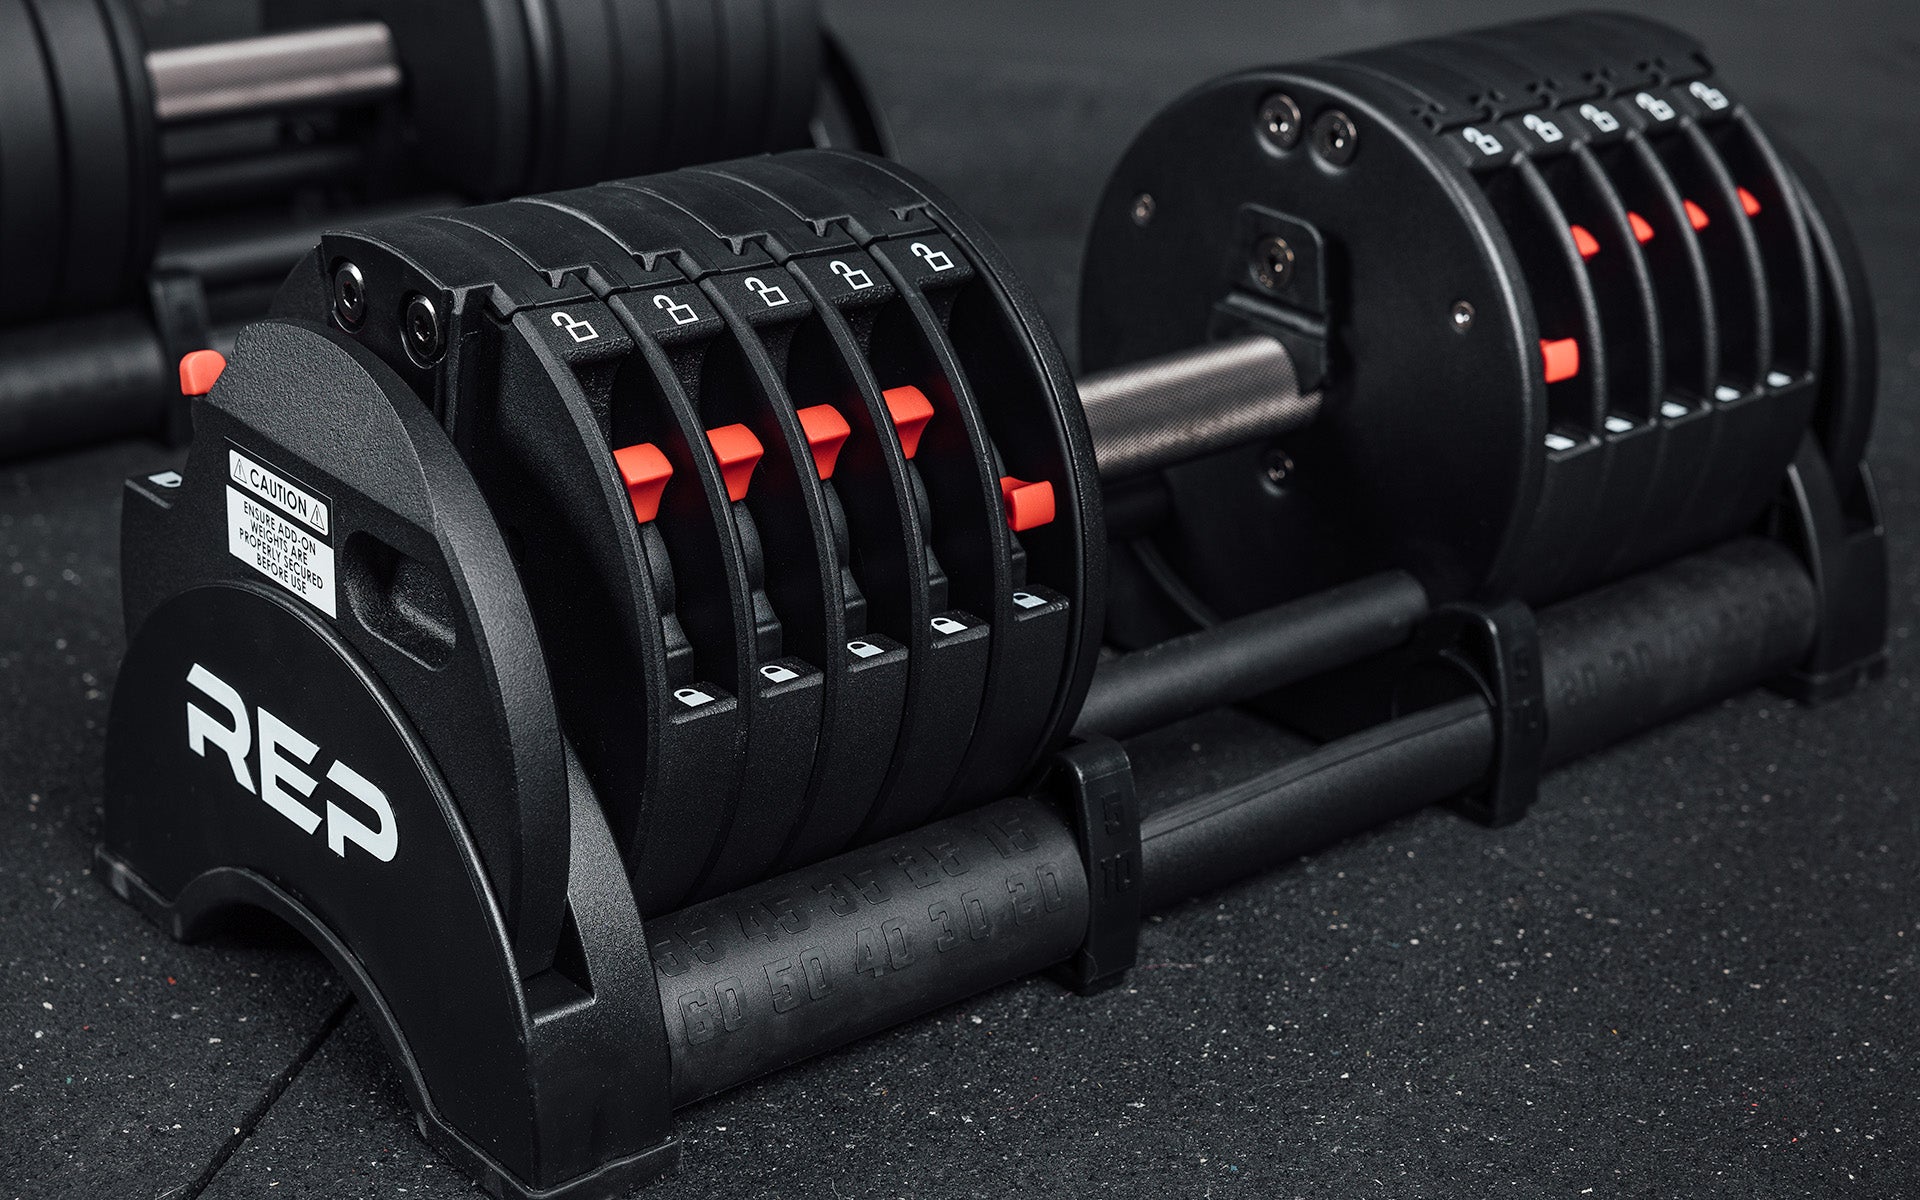 Close-up view of a single 60lb REP Fitness QuickDraw Adjustable Dumbbell.